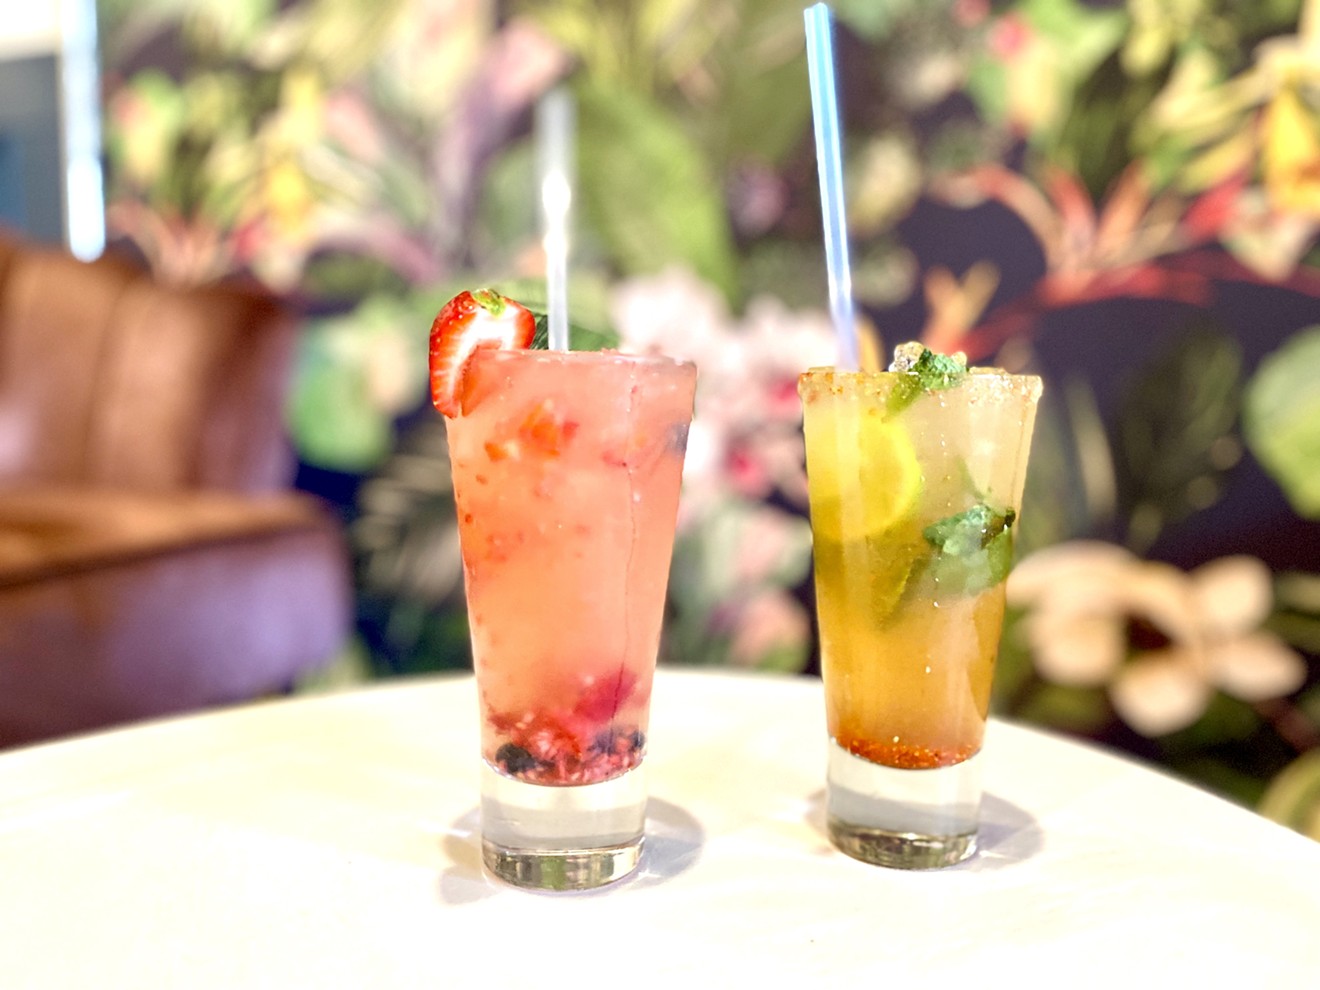 The mocktails at Goji Berry Cafe include buzzy ingredients without the hangover.